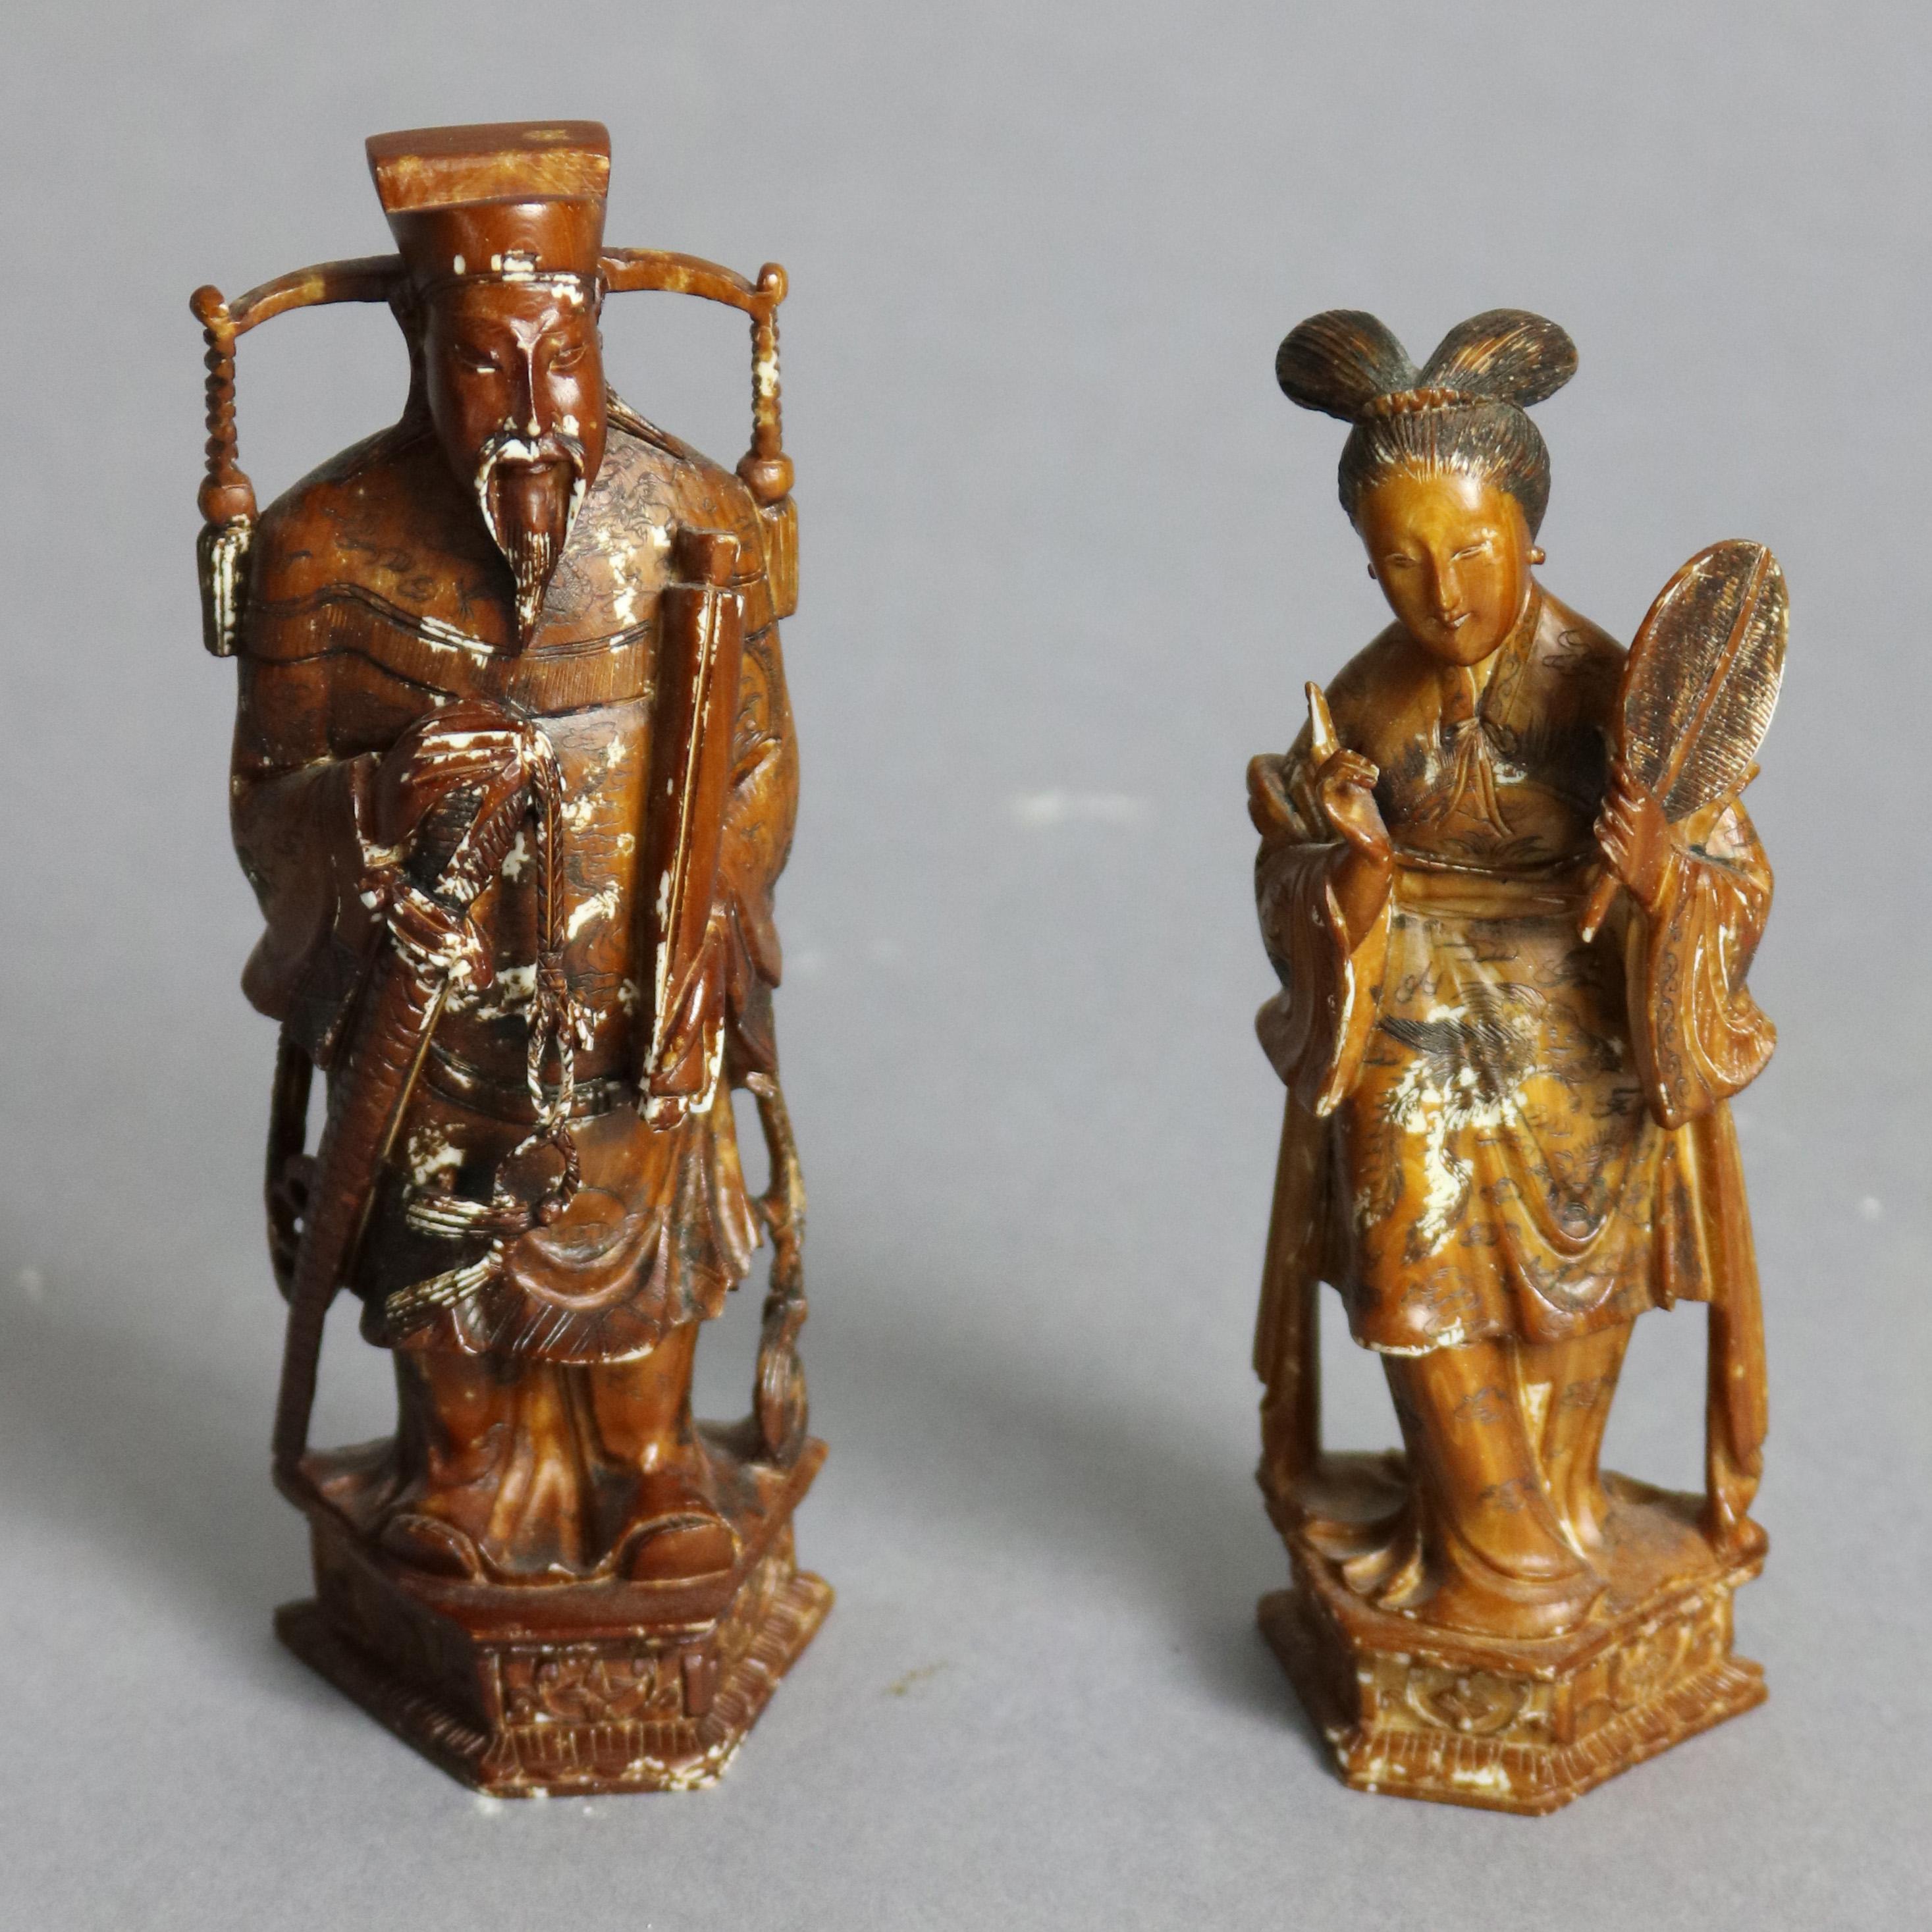 An antique Chinese chess set offers highly detailed hand carved figures, each an individual sculpture, with protective case having individual cradles for each piece and chess board exterior, circa 1920

***DELIVERY NOTICE – Due to COVID-19 we are